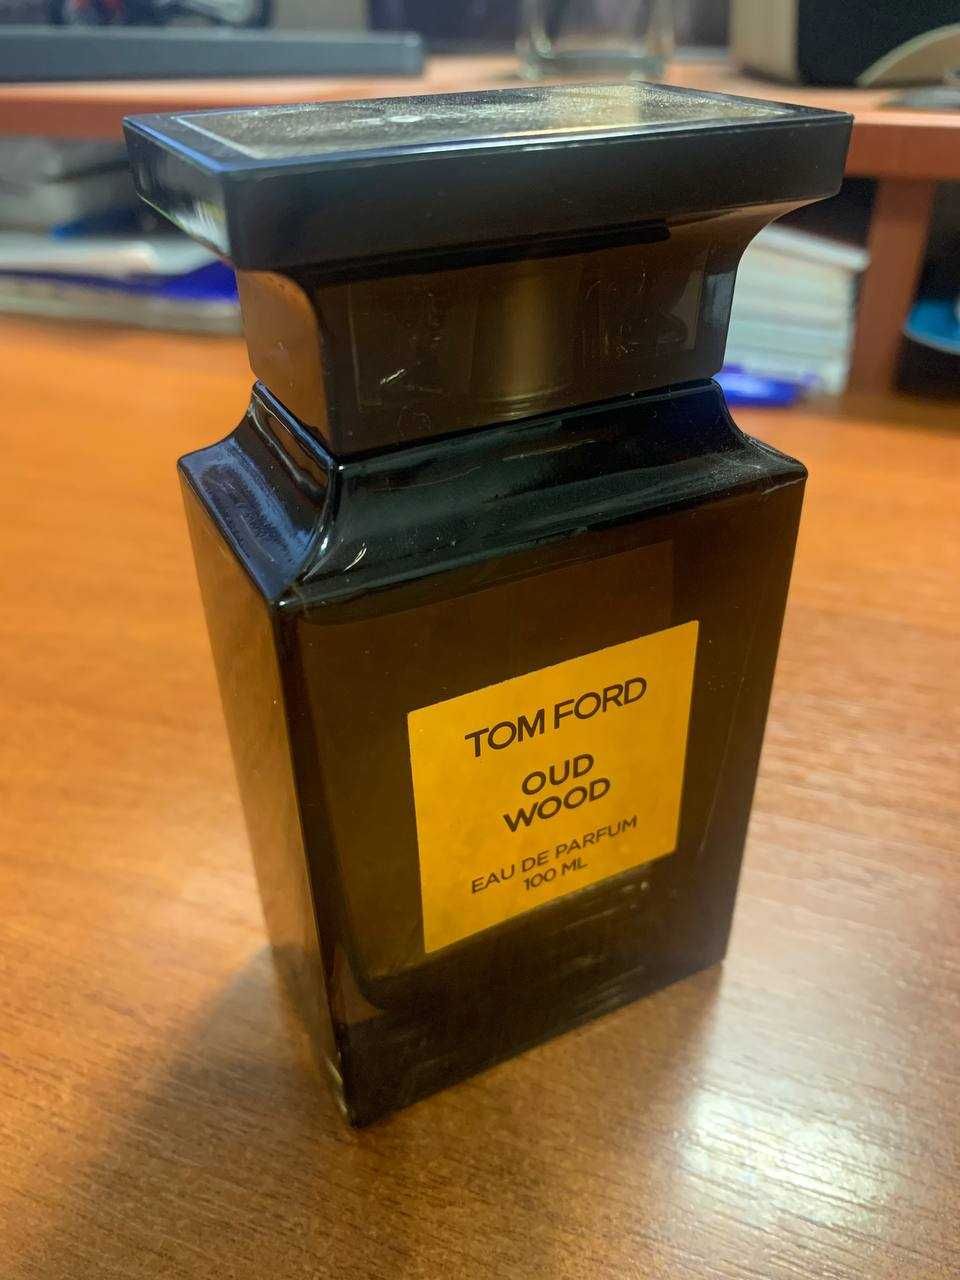 Tom Ford Out Wood